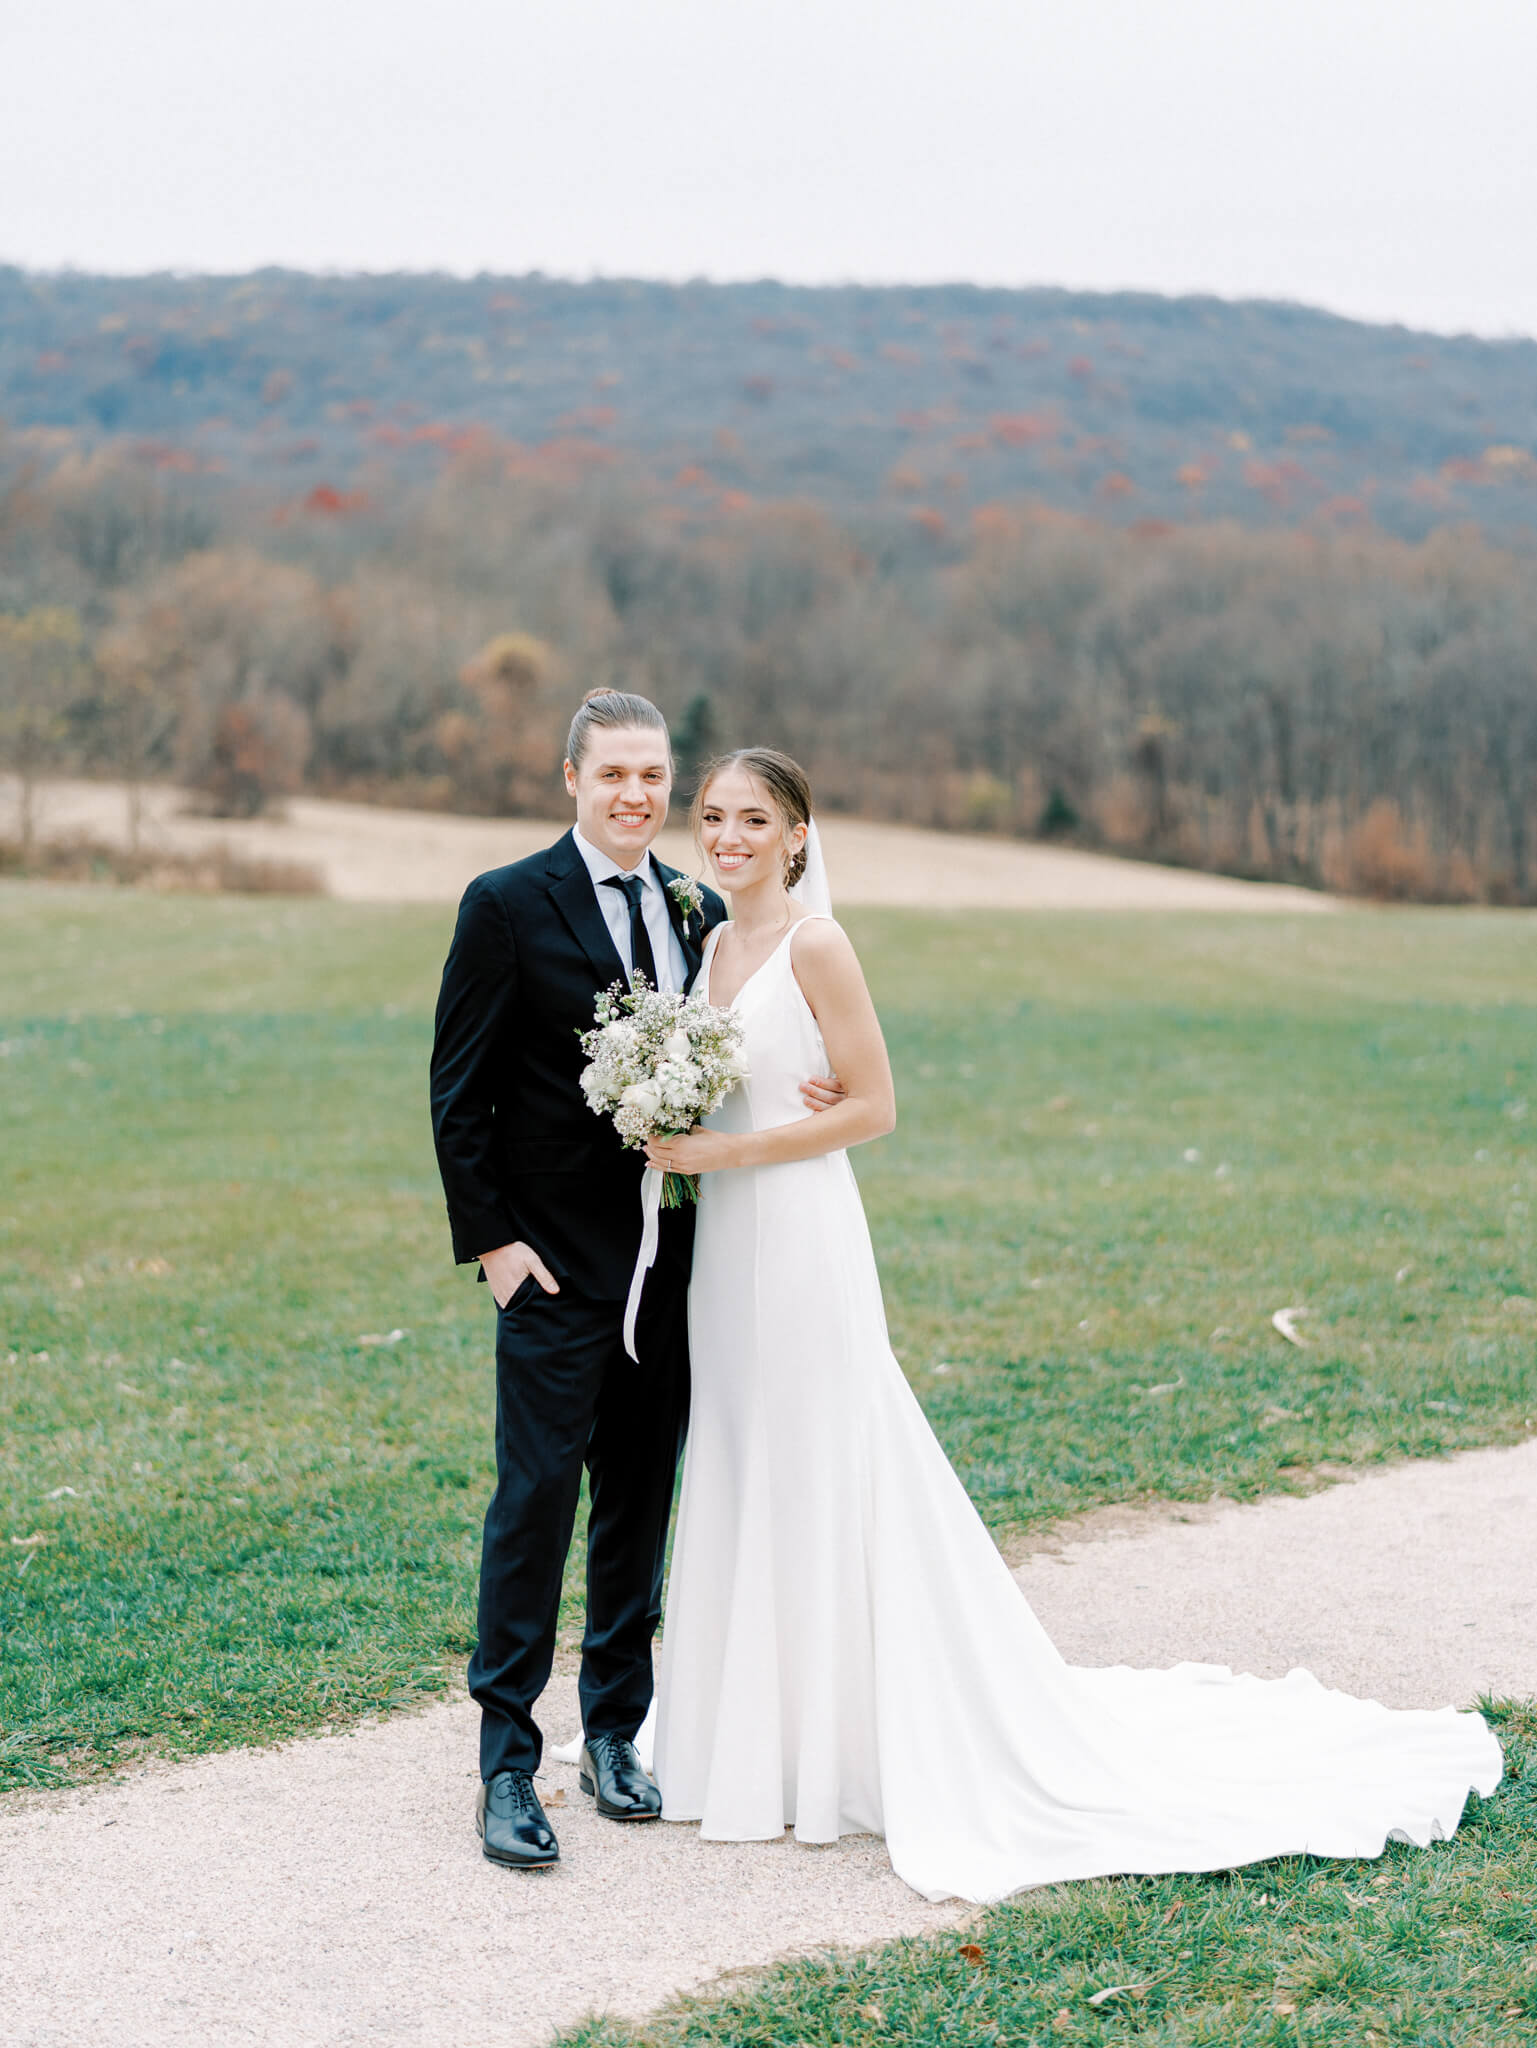 Formal wedding portrait of the newlywed bride and groom in front of the mountainous backdrop at Springfield Manor.